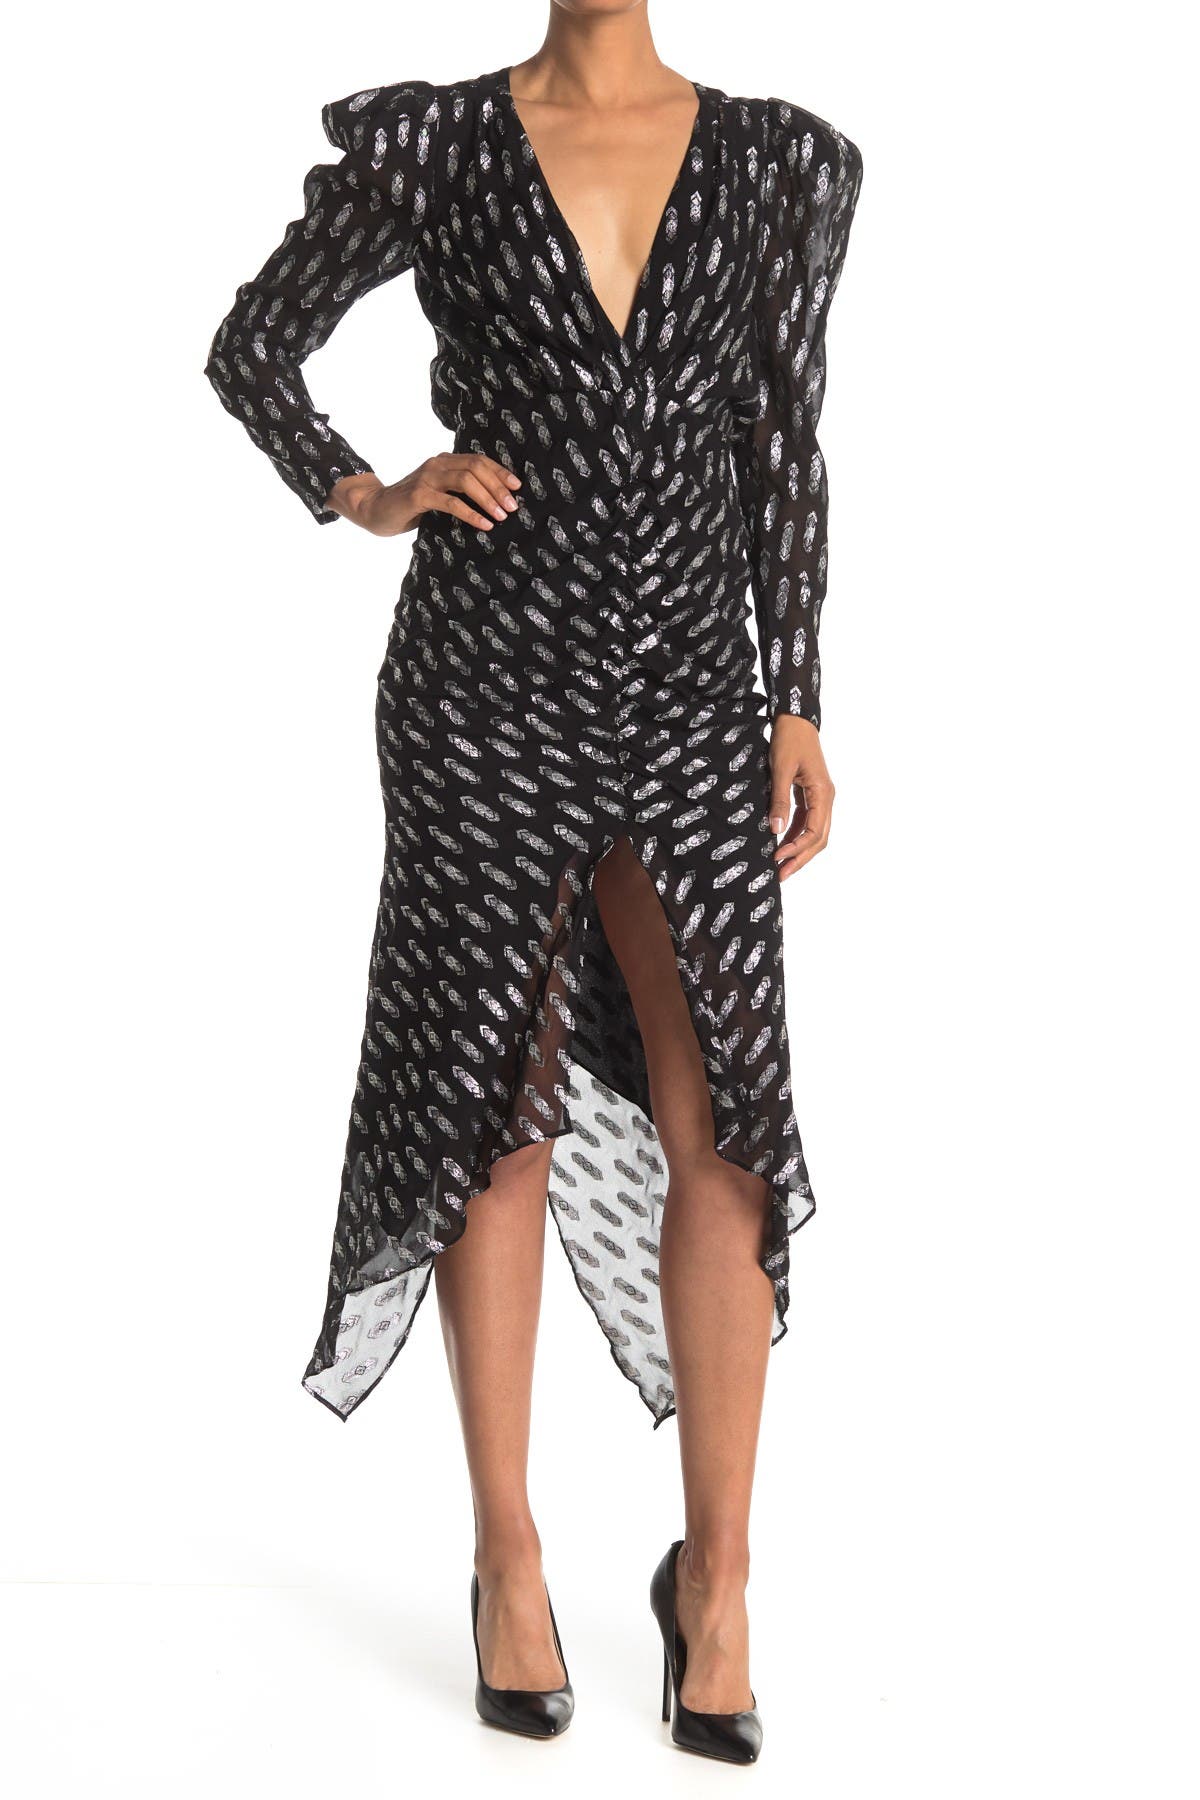 Ronny Kobo Astrid Plunging Neckline Bodycon Dress In Open Miscellaneous